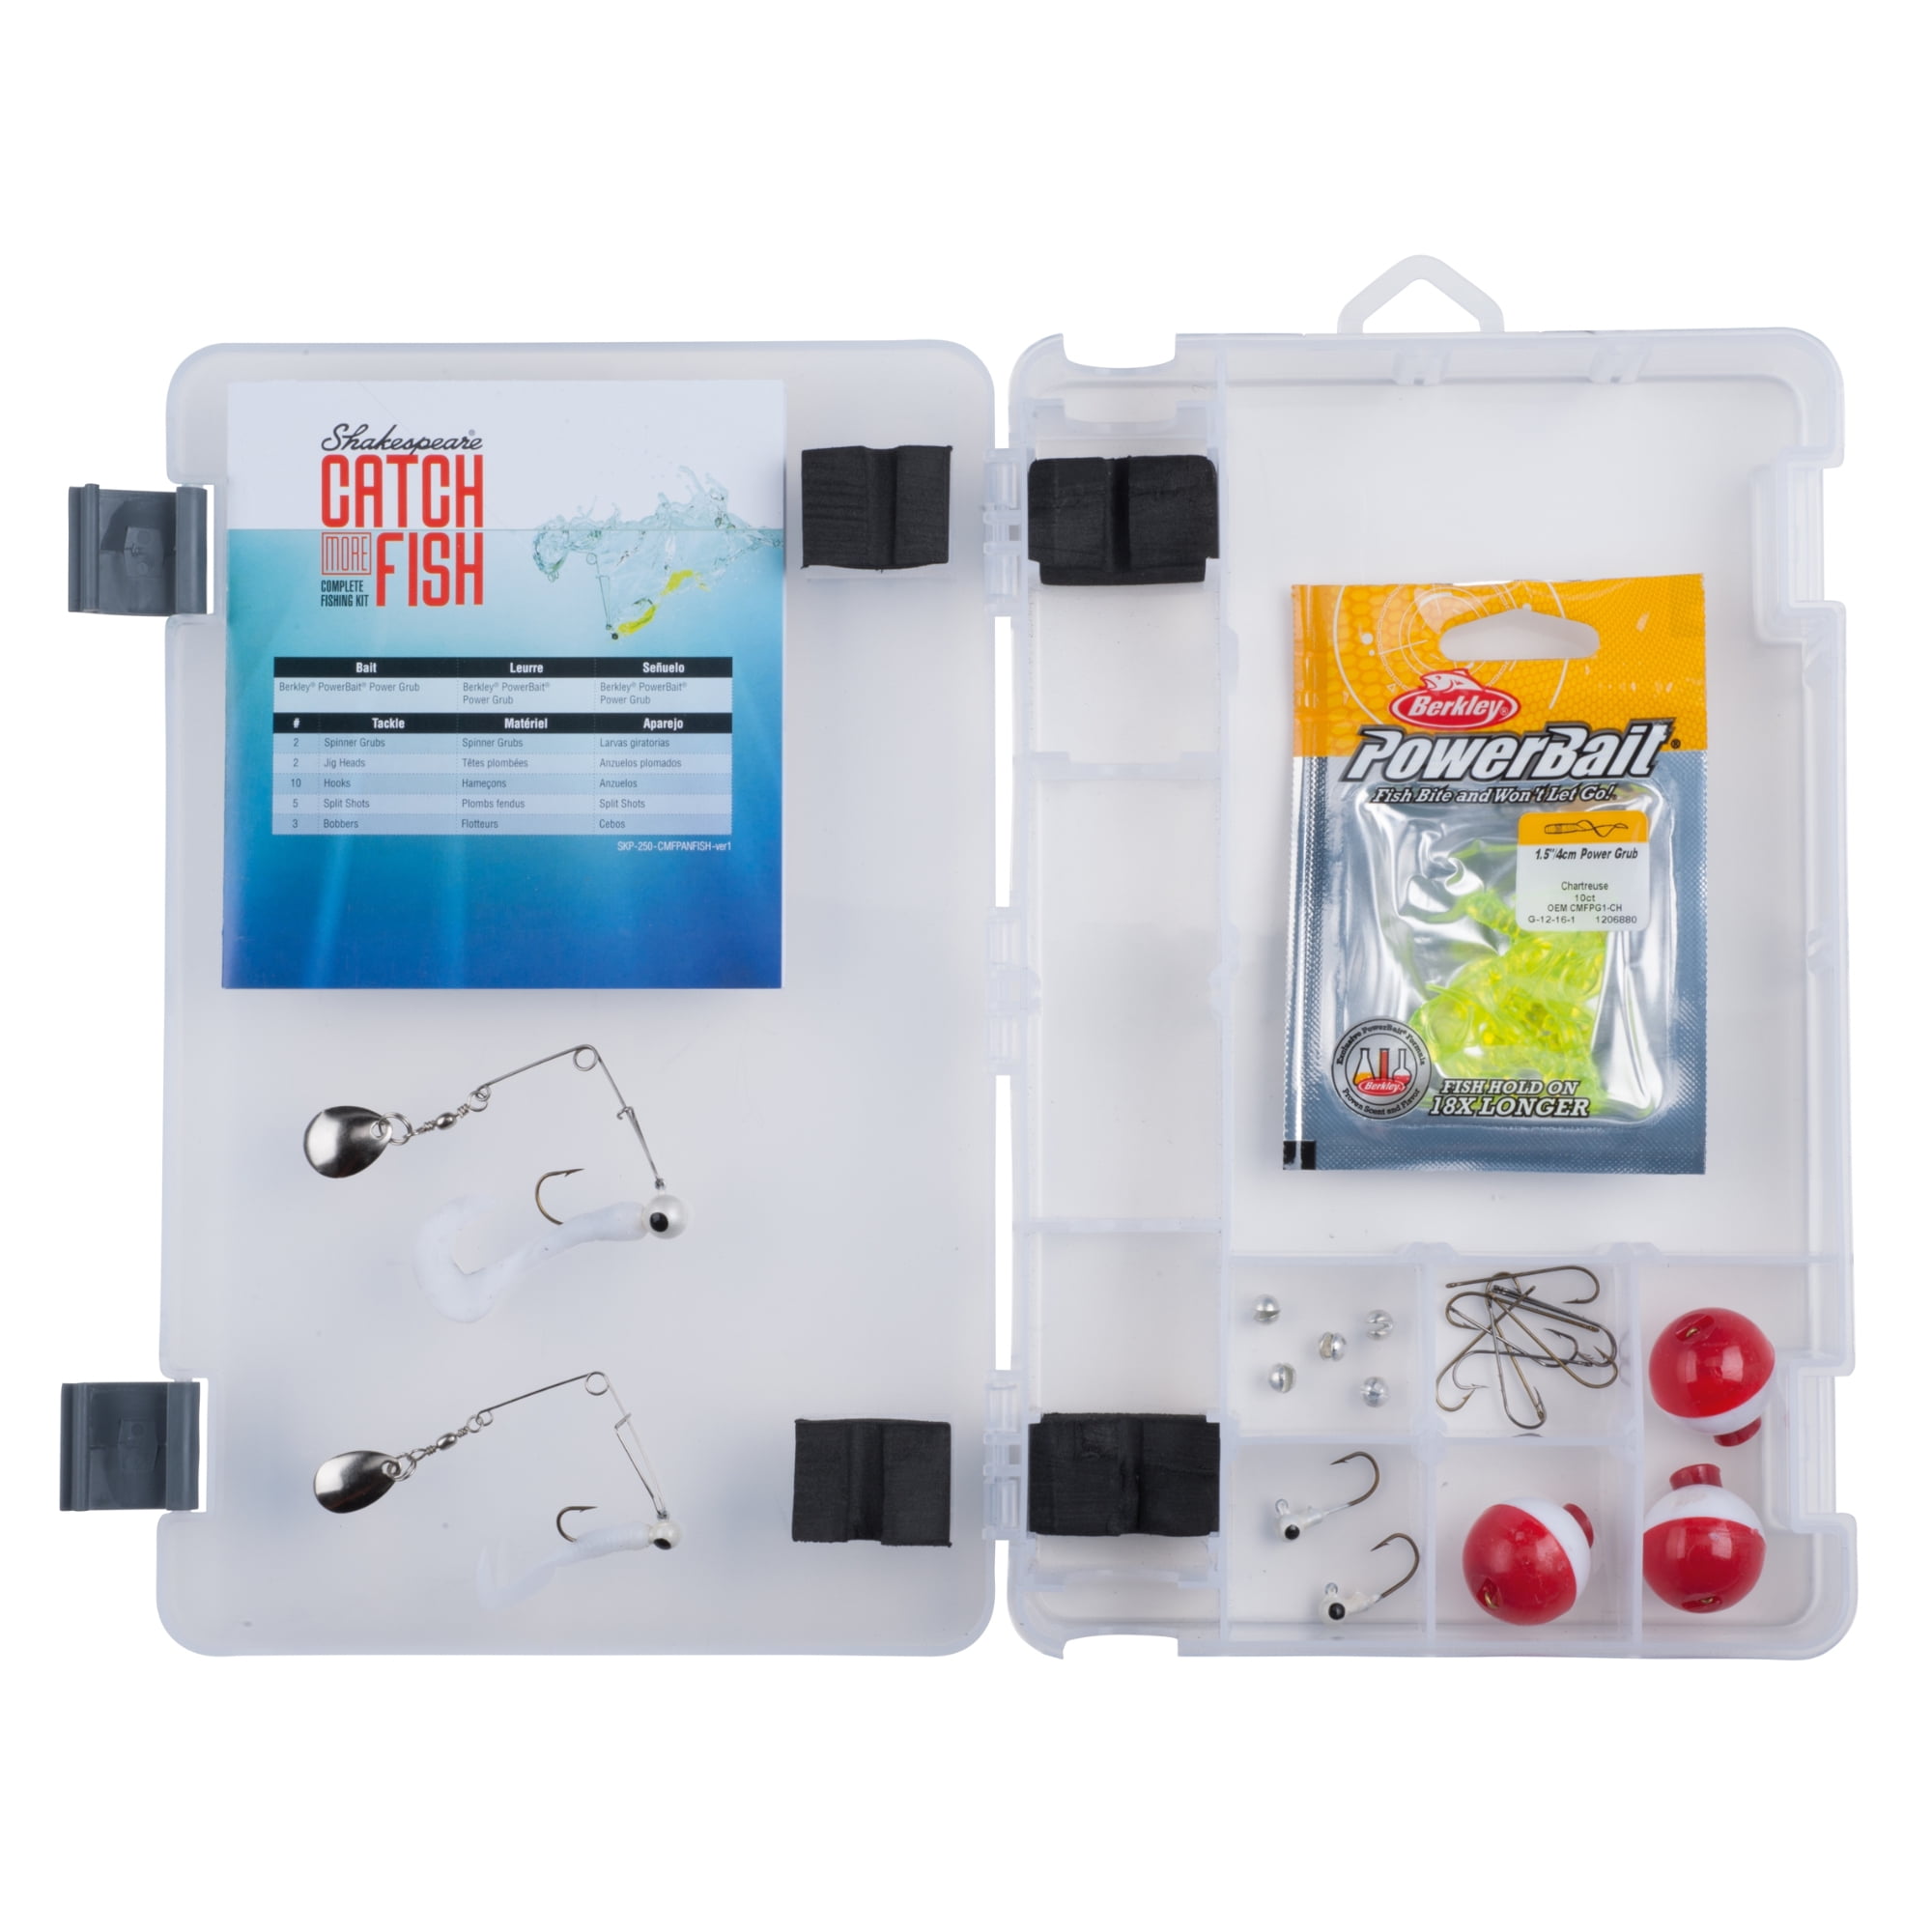 Shakespeare Catch More Fishâ„¢ Walleye Fishing Kit Tools and